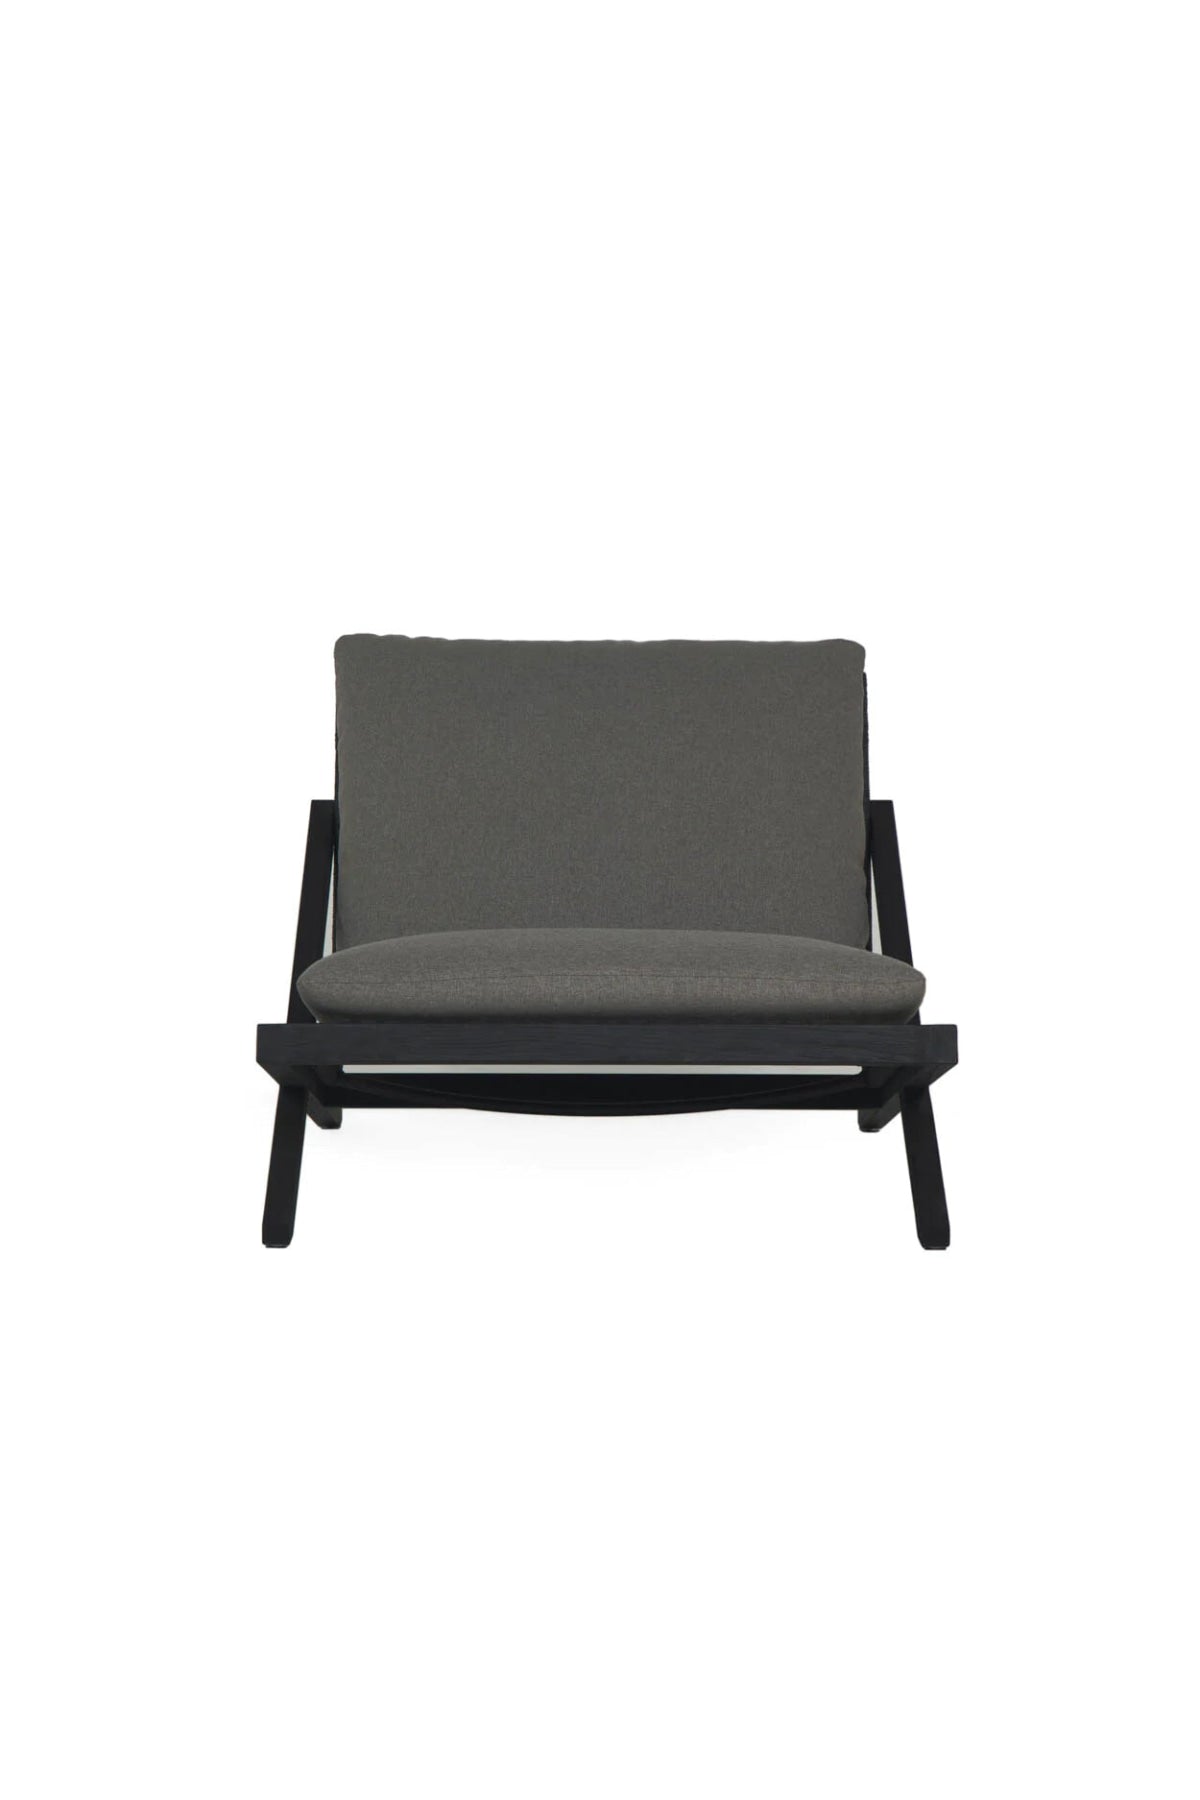 Venice Outdoor Lounge Chair - Charcoal